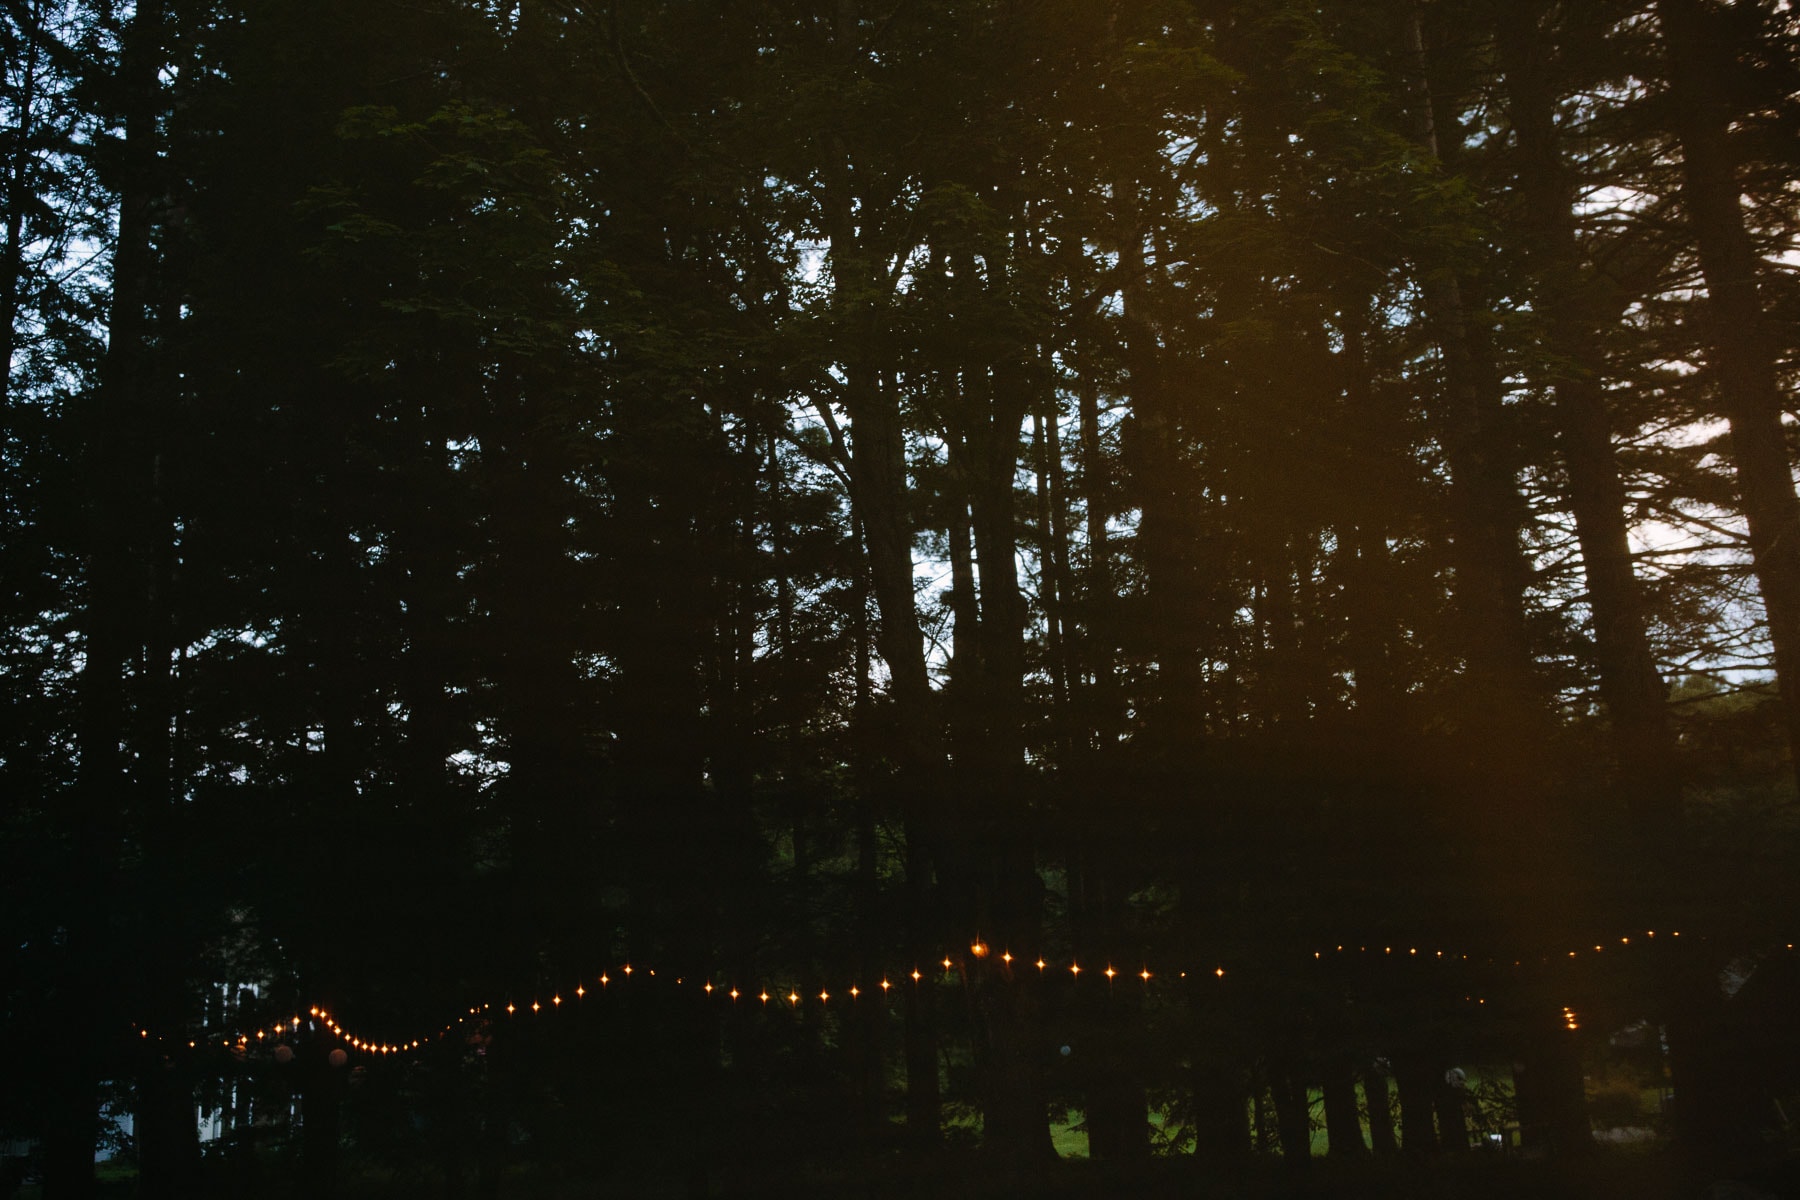 bistro lights illuminate a path in the woods | Kelly Benvenuto Photography